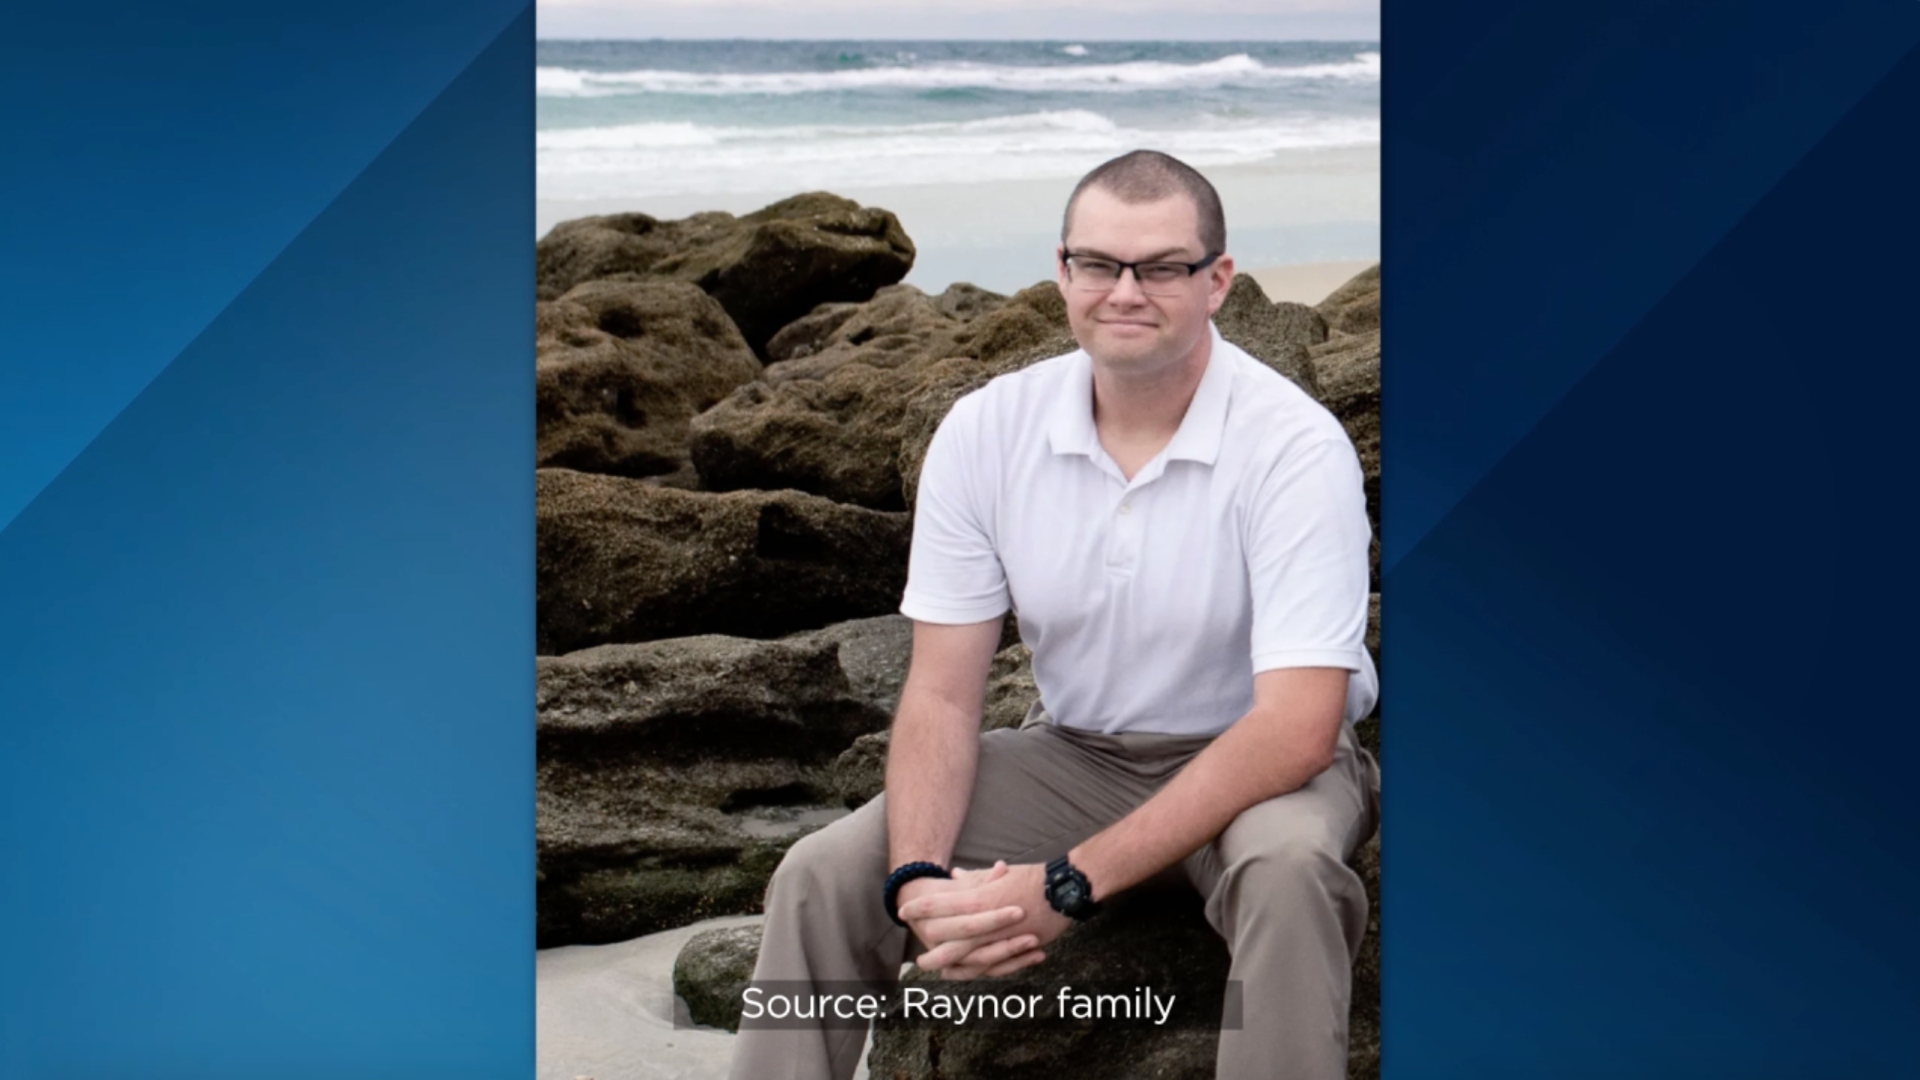 ‘Heart of gold’: Who is Jason Raynor, the Daytona Beach police officer shot in the head?